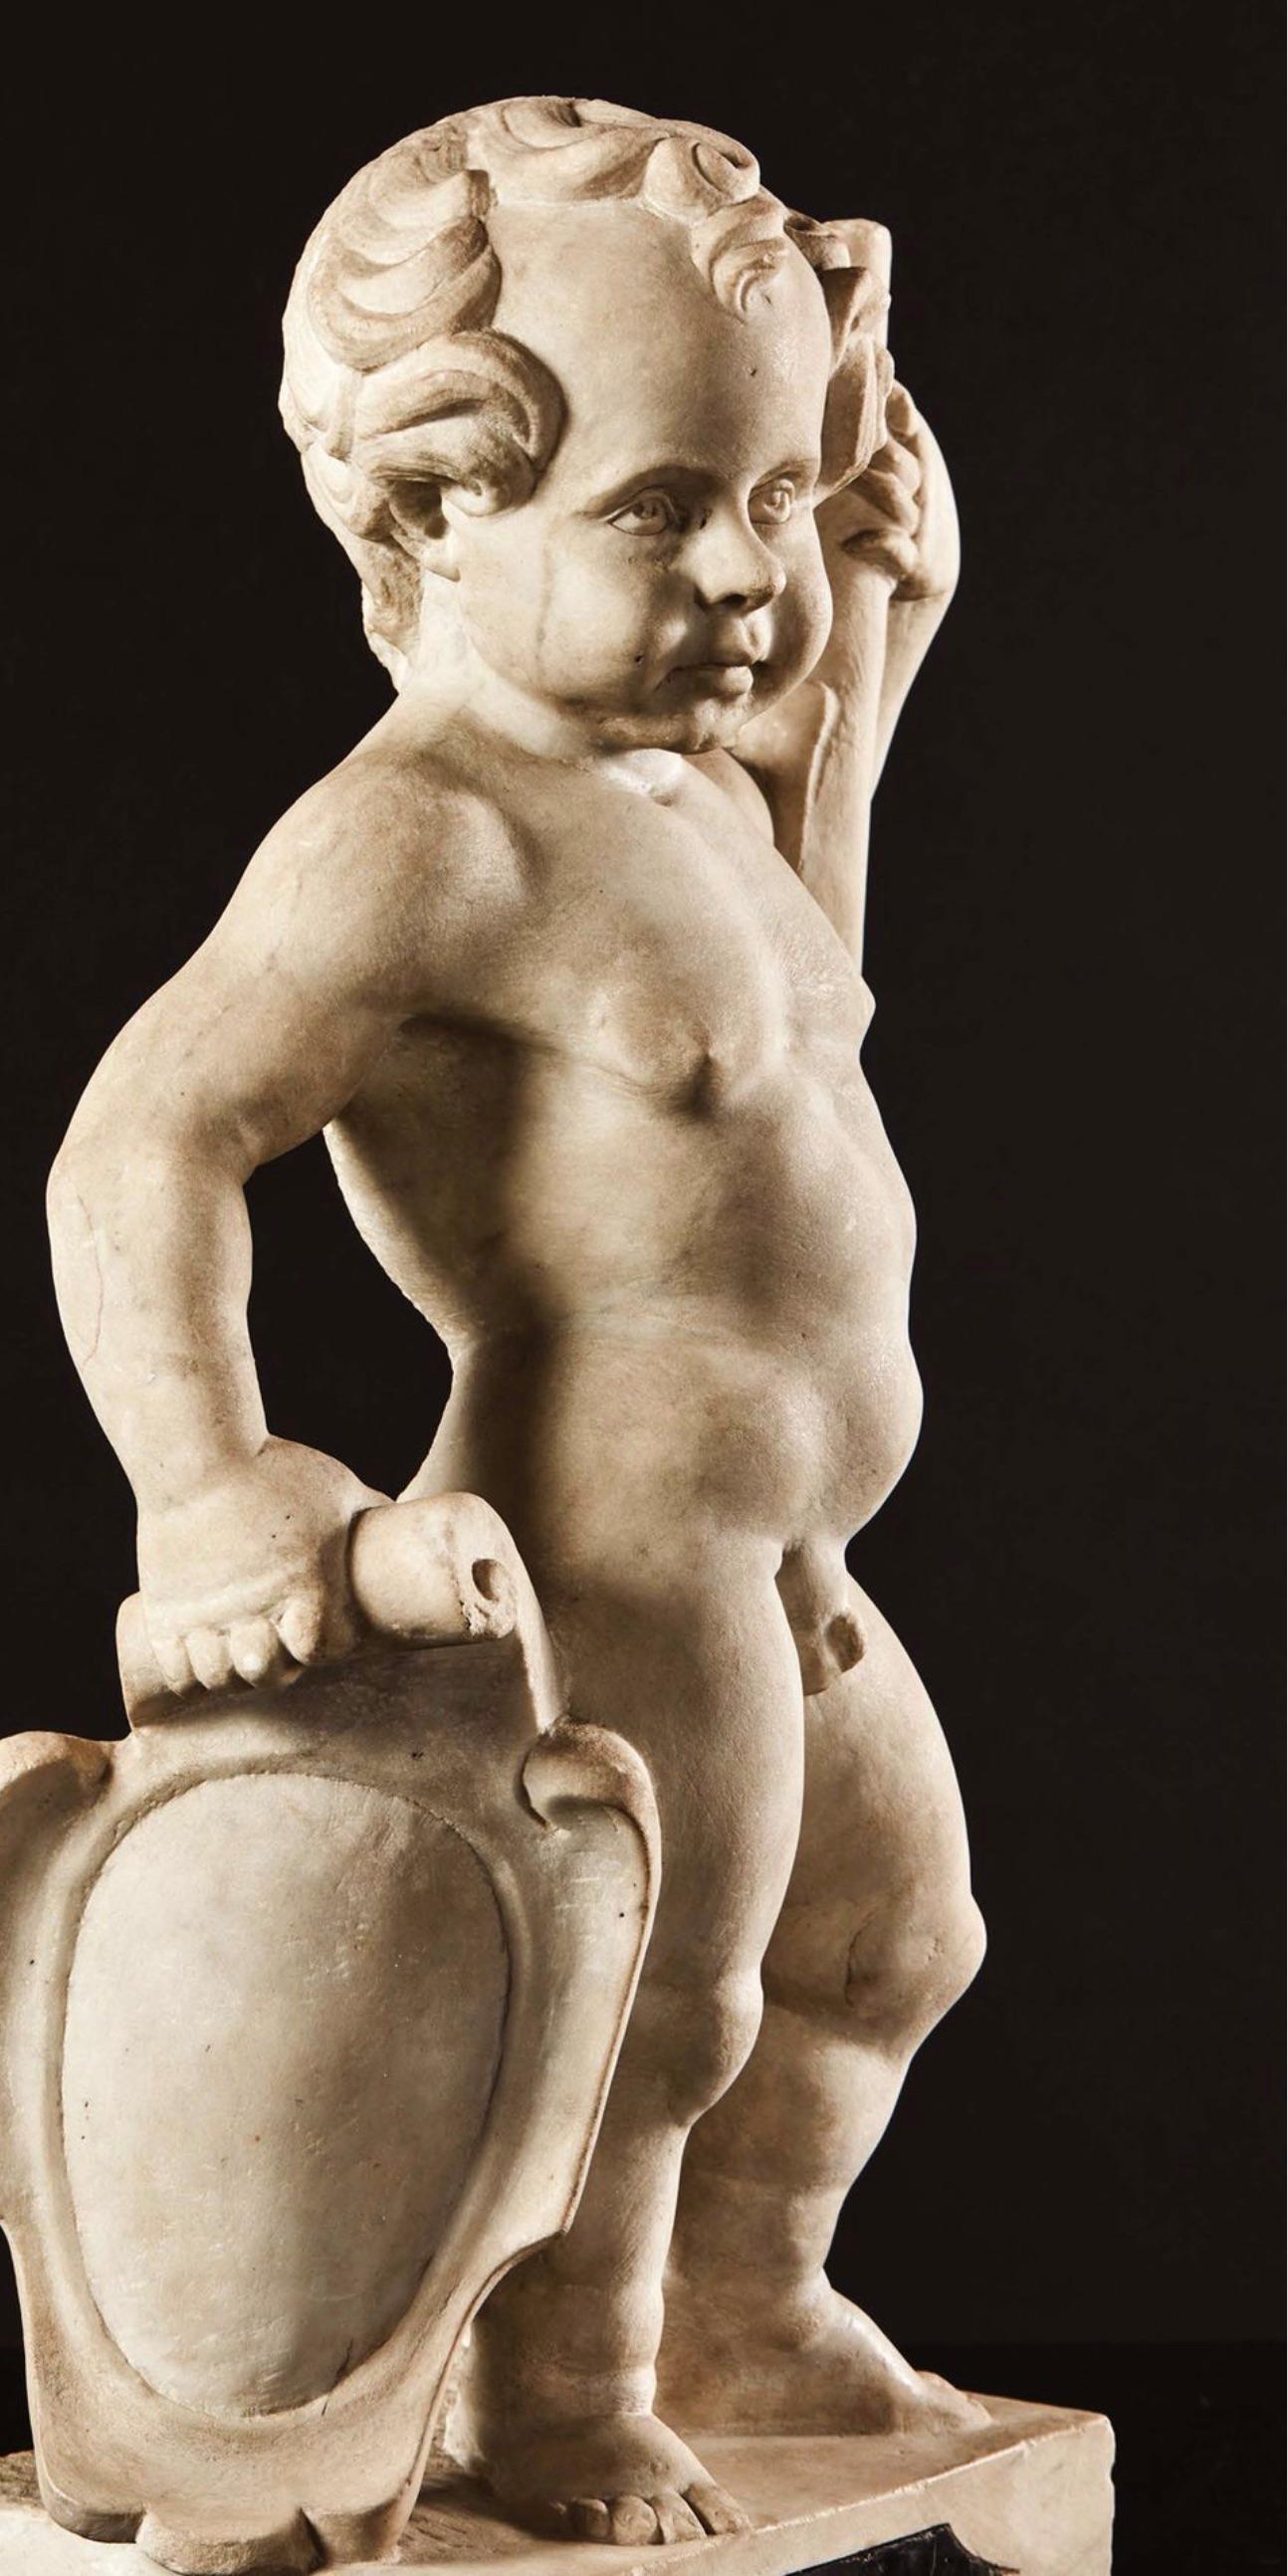 Hercules holding a coat of arms
Flemish, XVII century
White and black marble
Measures: 67 x 32 x 19 cm

Hercules is depicted naked, holding a coat of arms with the right hand and his club with his left hand. The child presents a high rounded